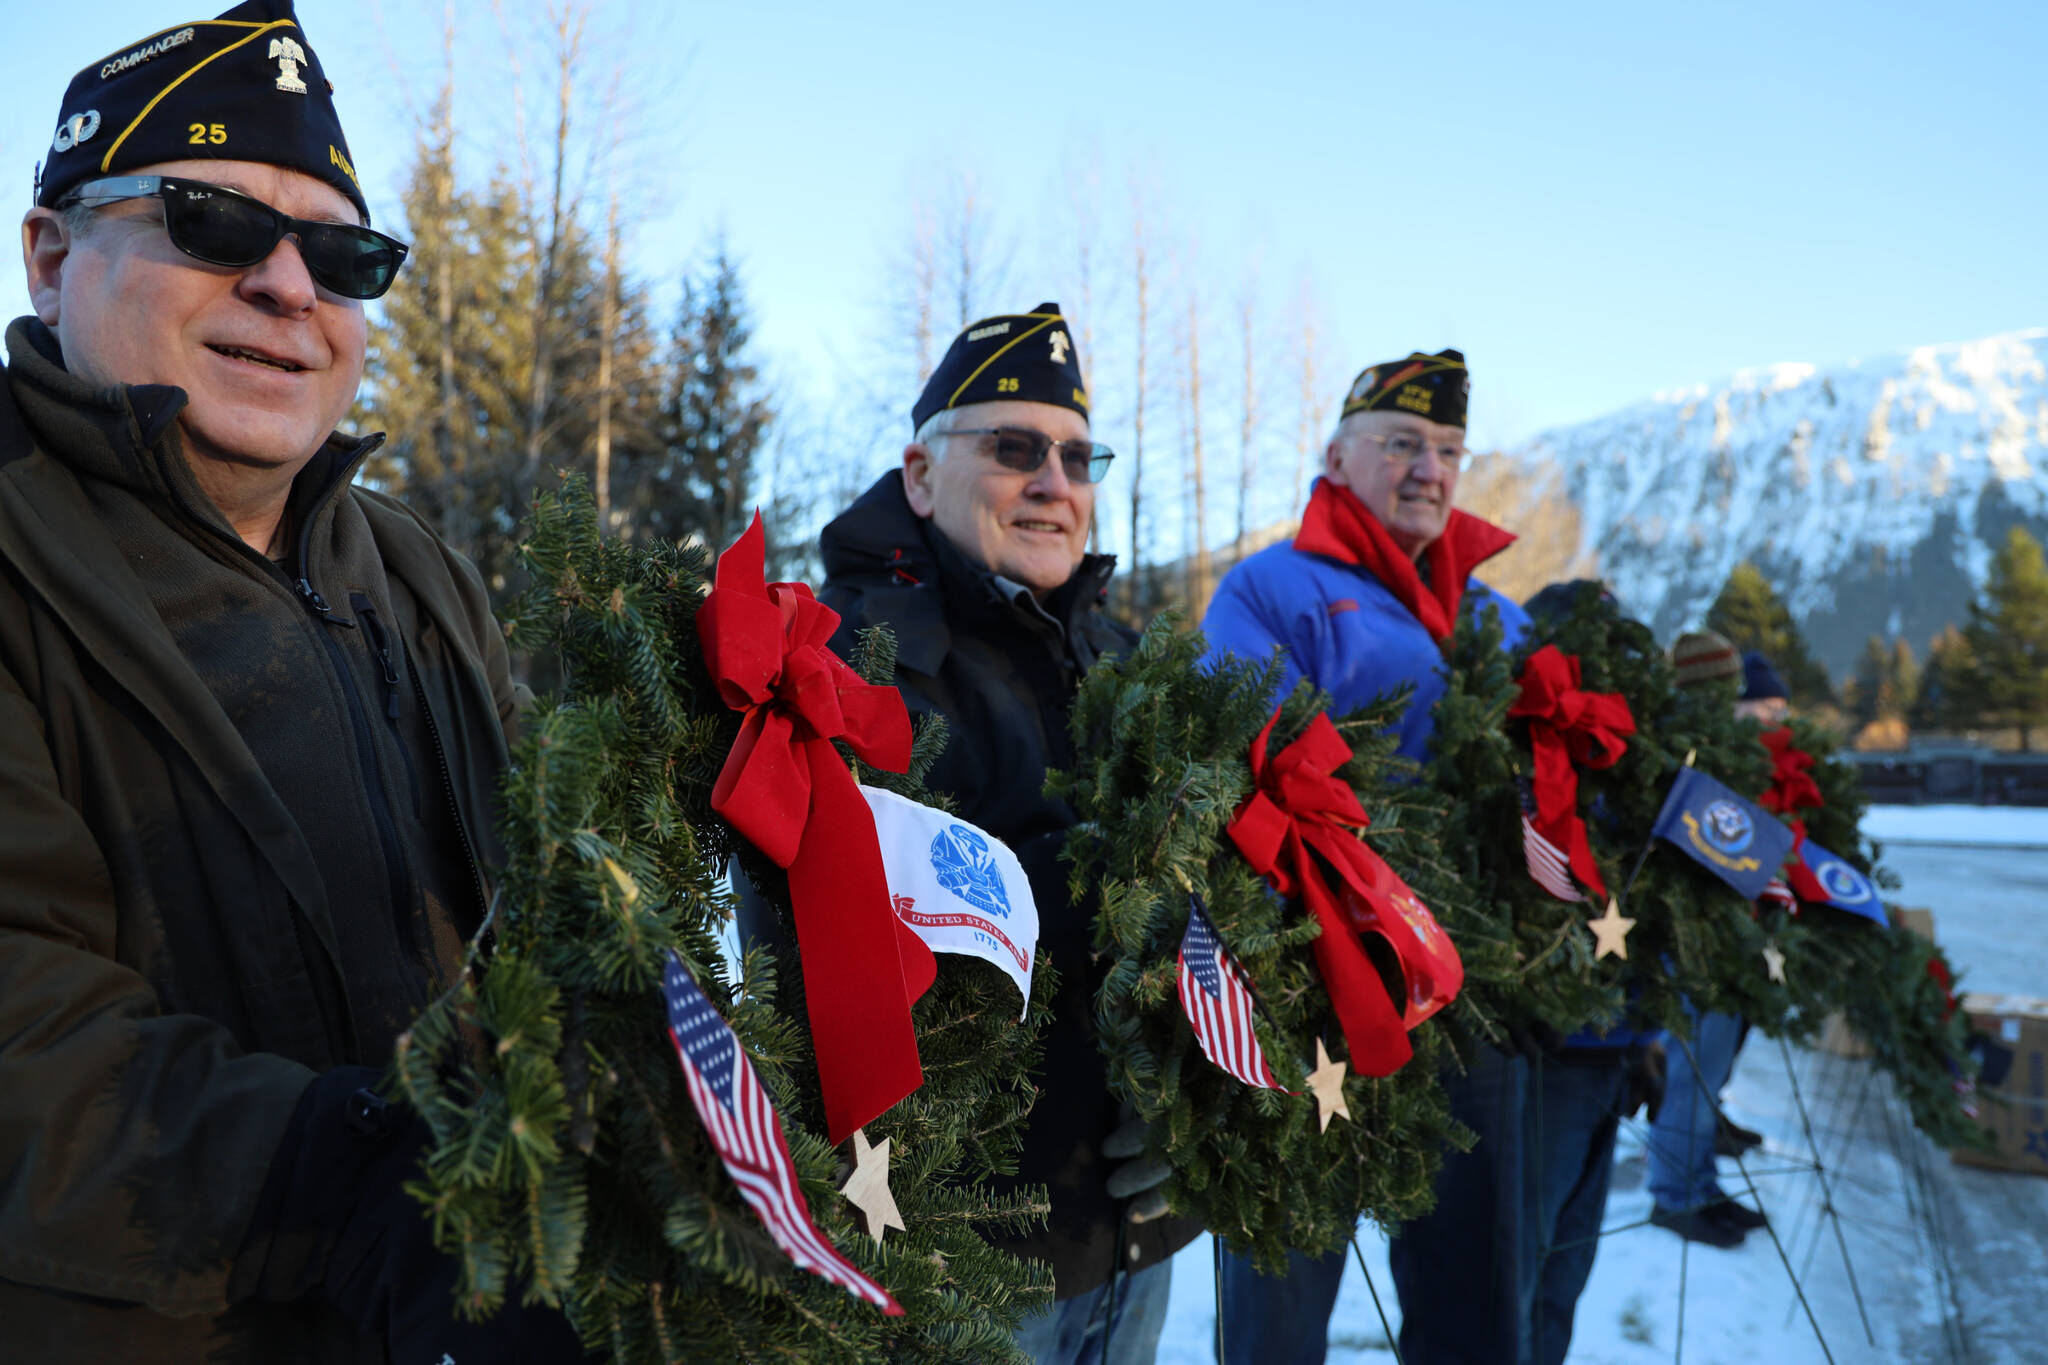 From left to right, Duff Mitchell, Army National Guard veteran, Bill Clutton, Army veteran, and Tom Dawson, Navy veteran stand in a line holding wreaths during a laying of wreaths ceremony for National Wreaths Across America Day on Saturday afternoon. (Clarise Larson / Juneau Empire)